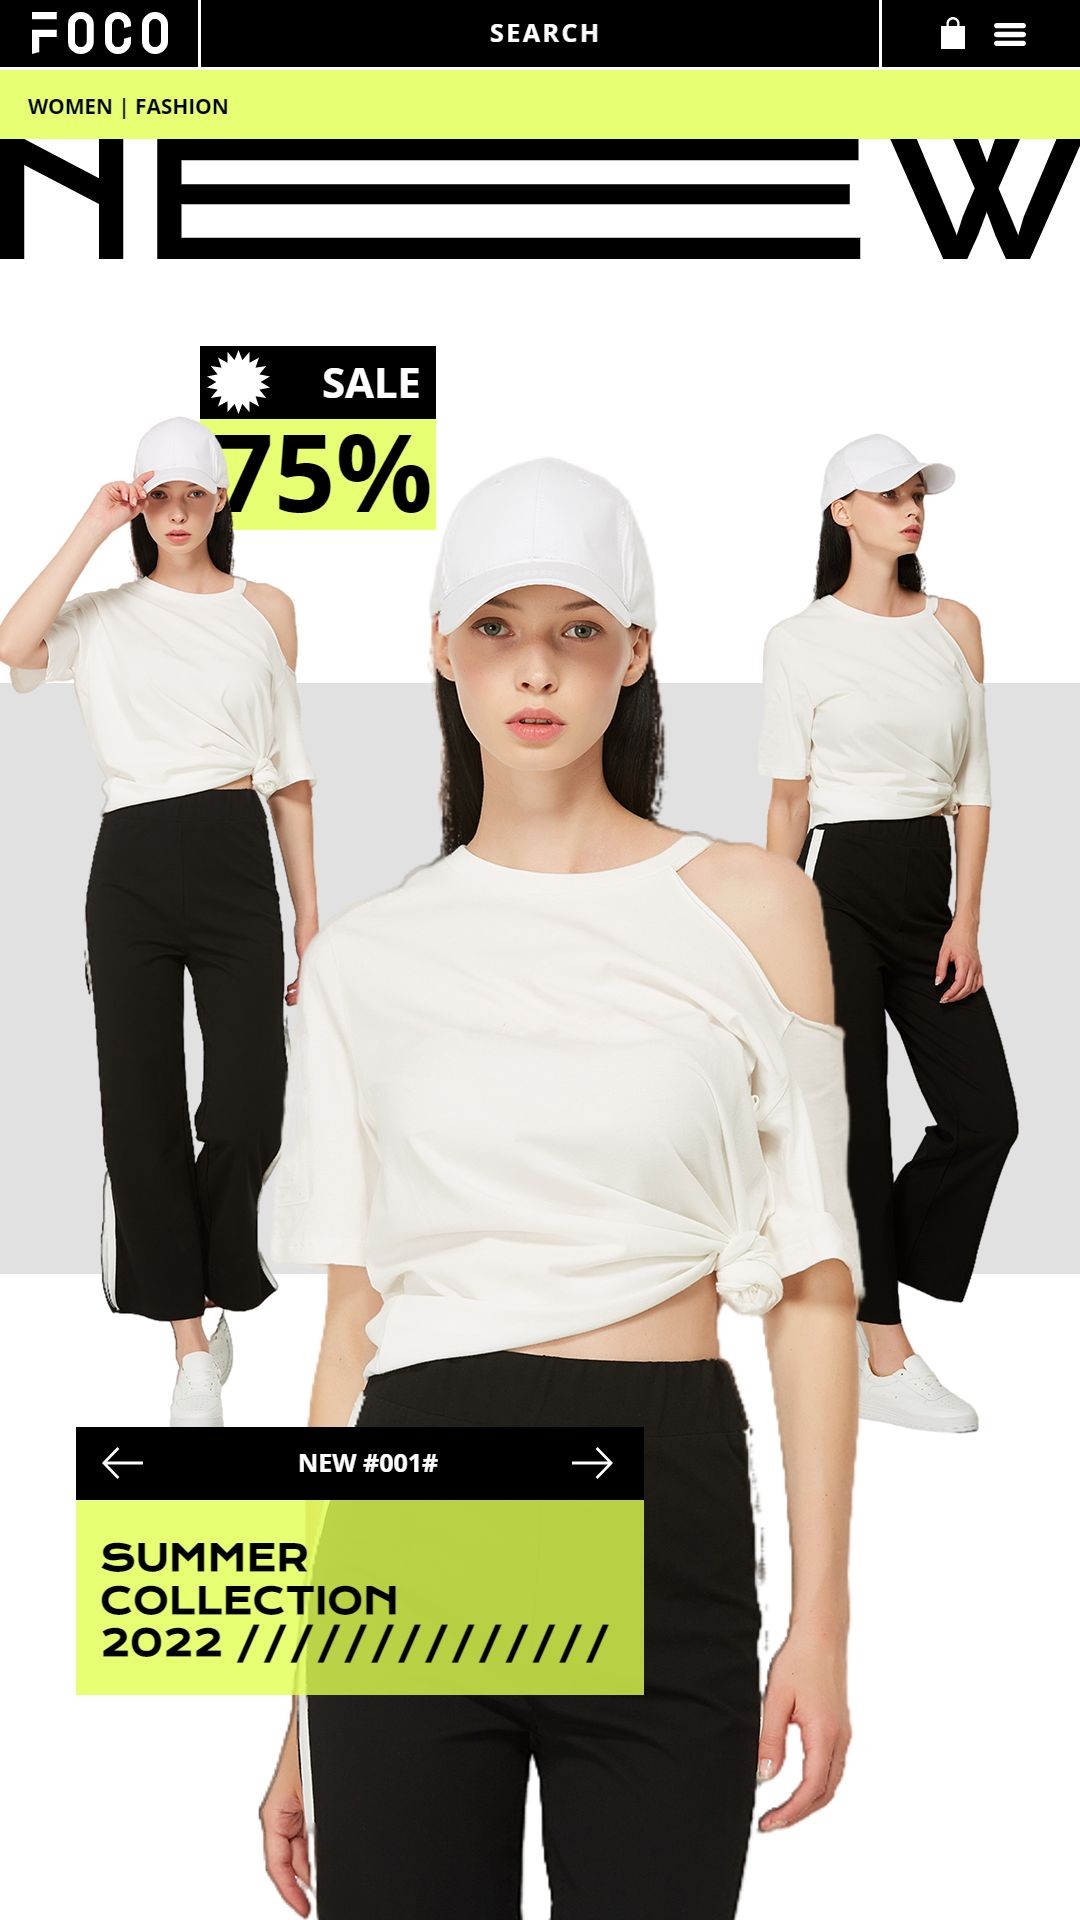 Women's Fashion Clothing Shop the Look OOTD Website Simulation Discount Sale Promo New Arrival Ecommerce Story